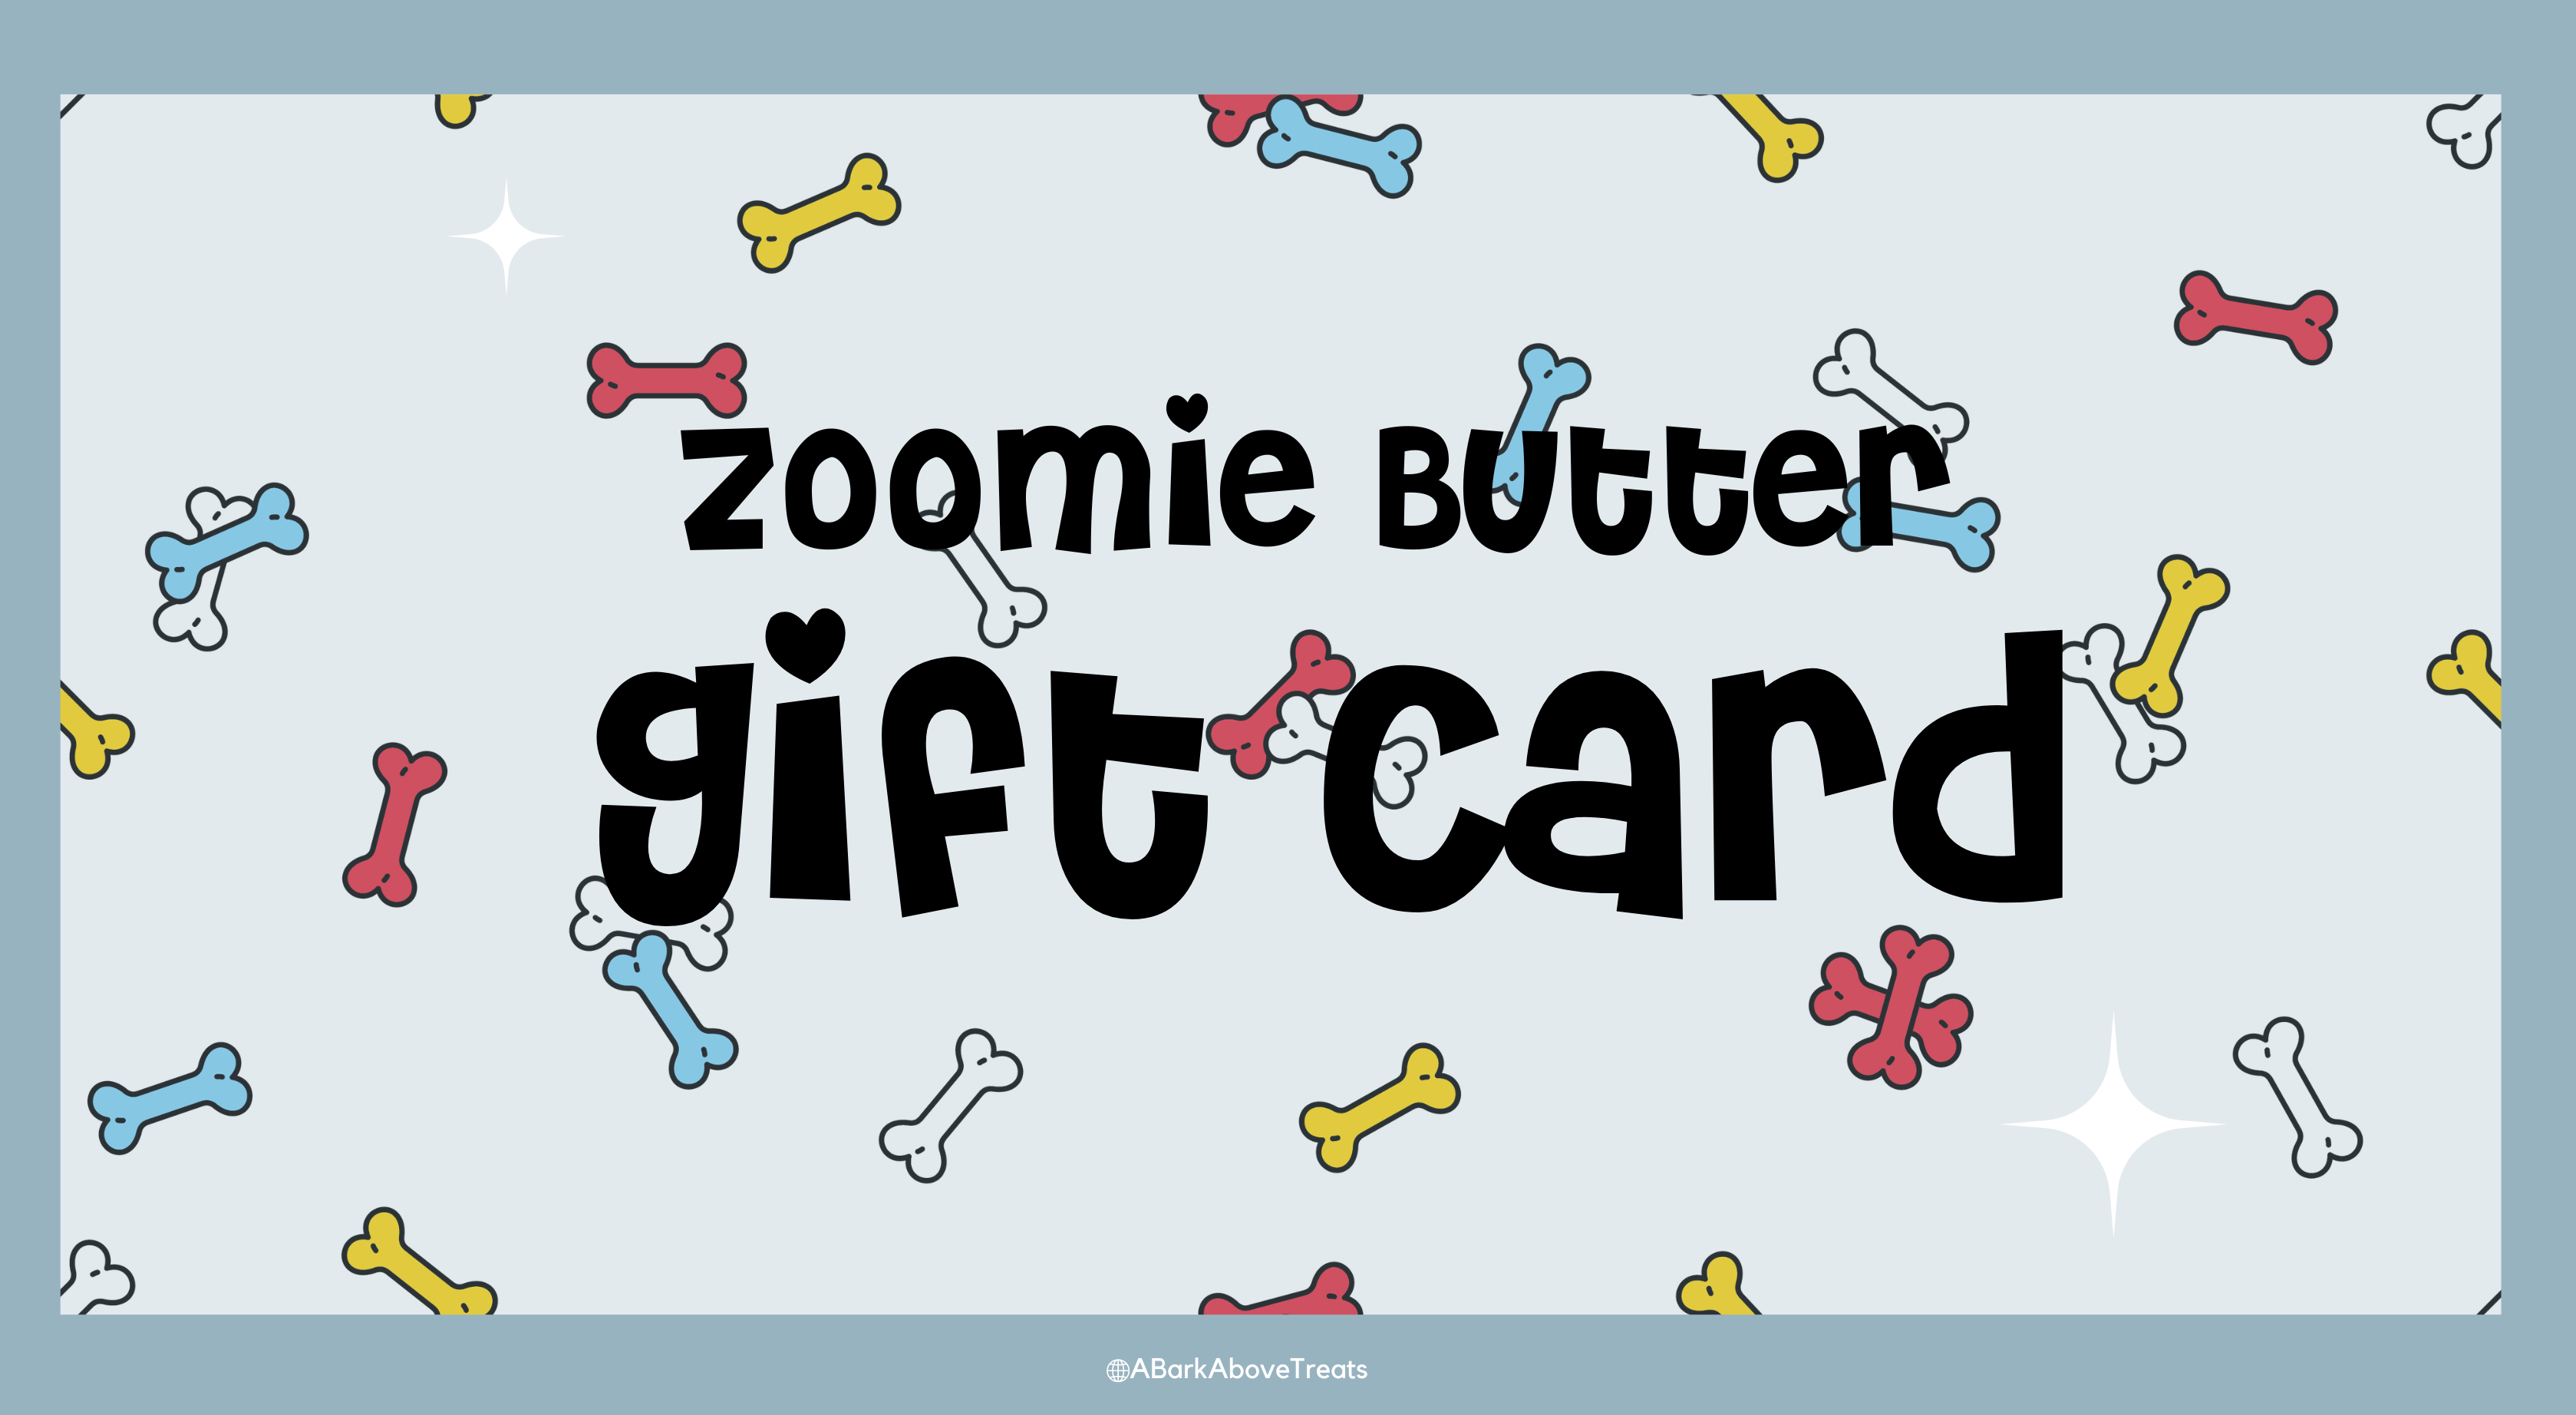 Zoomie Butter Gift Card